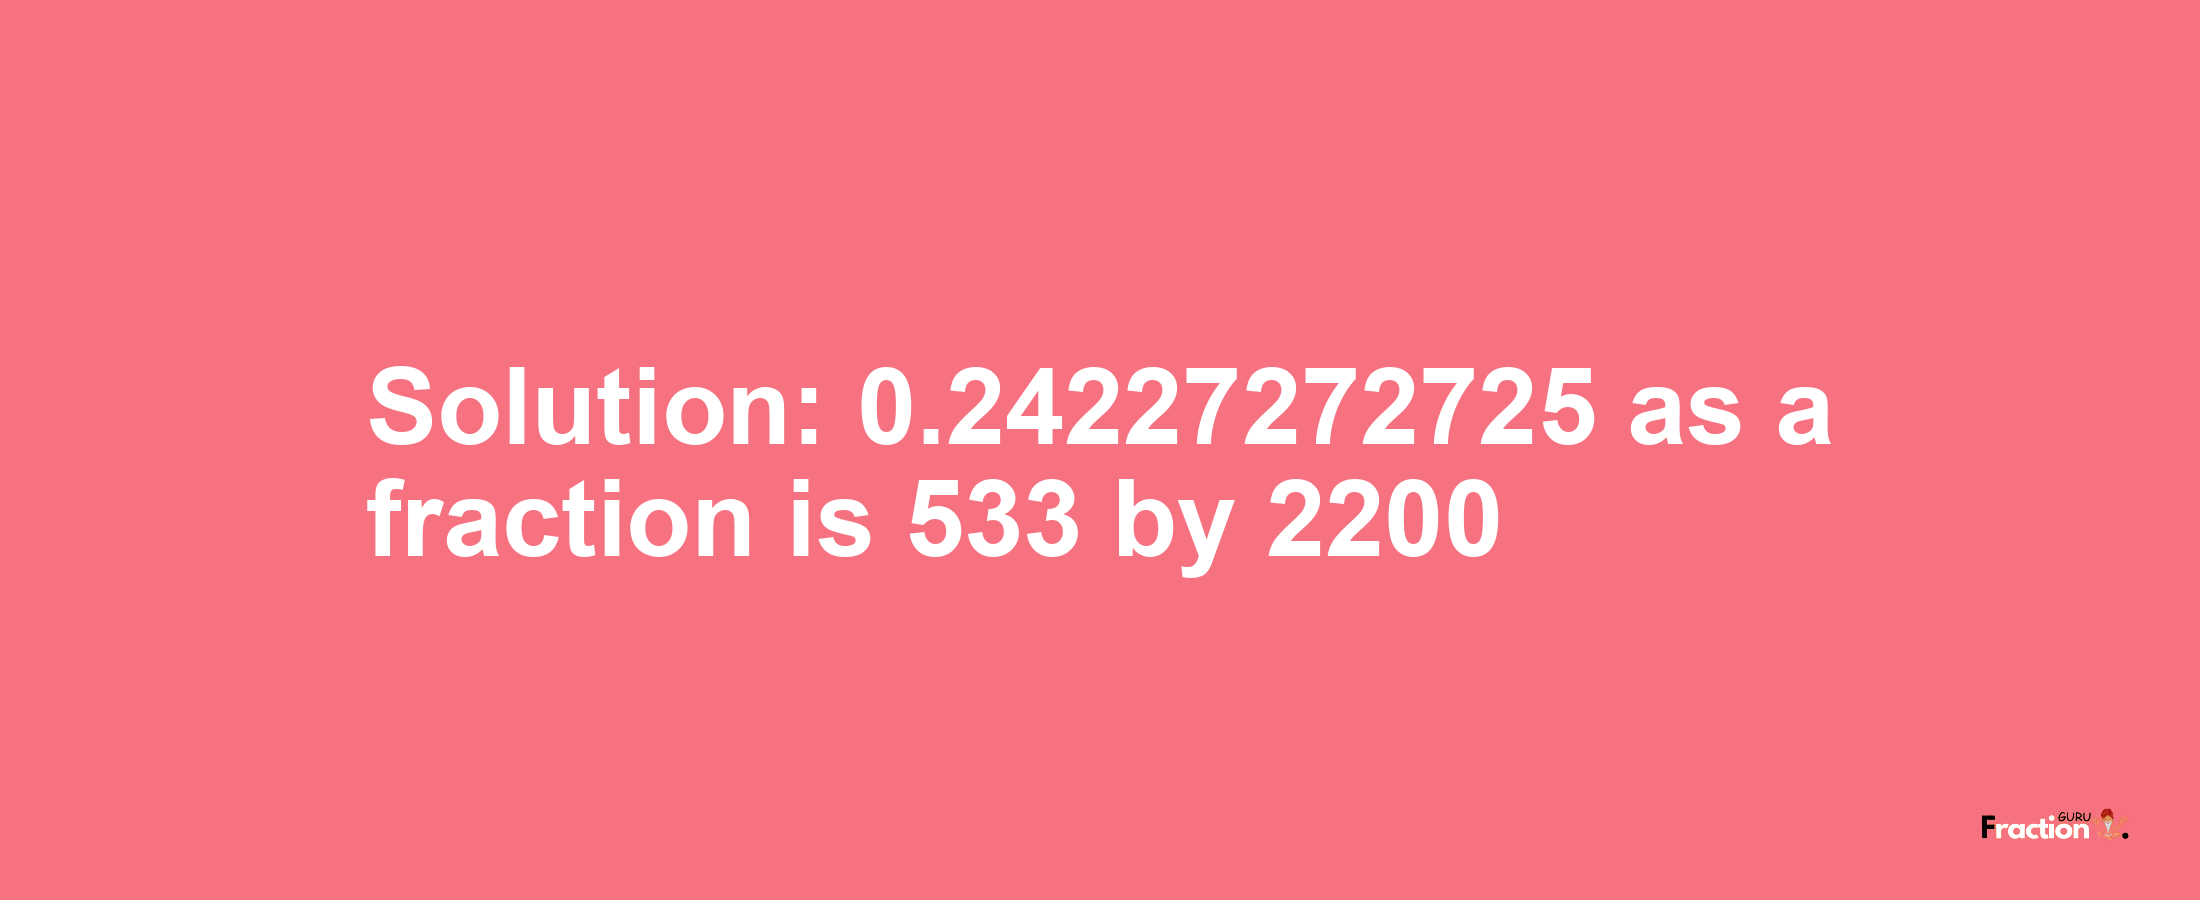 Solution:0.24227272725 as a fraction is 533/2200